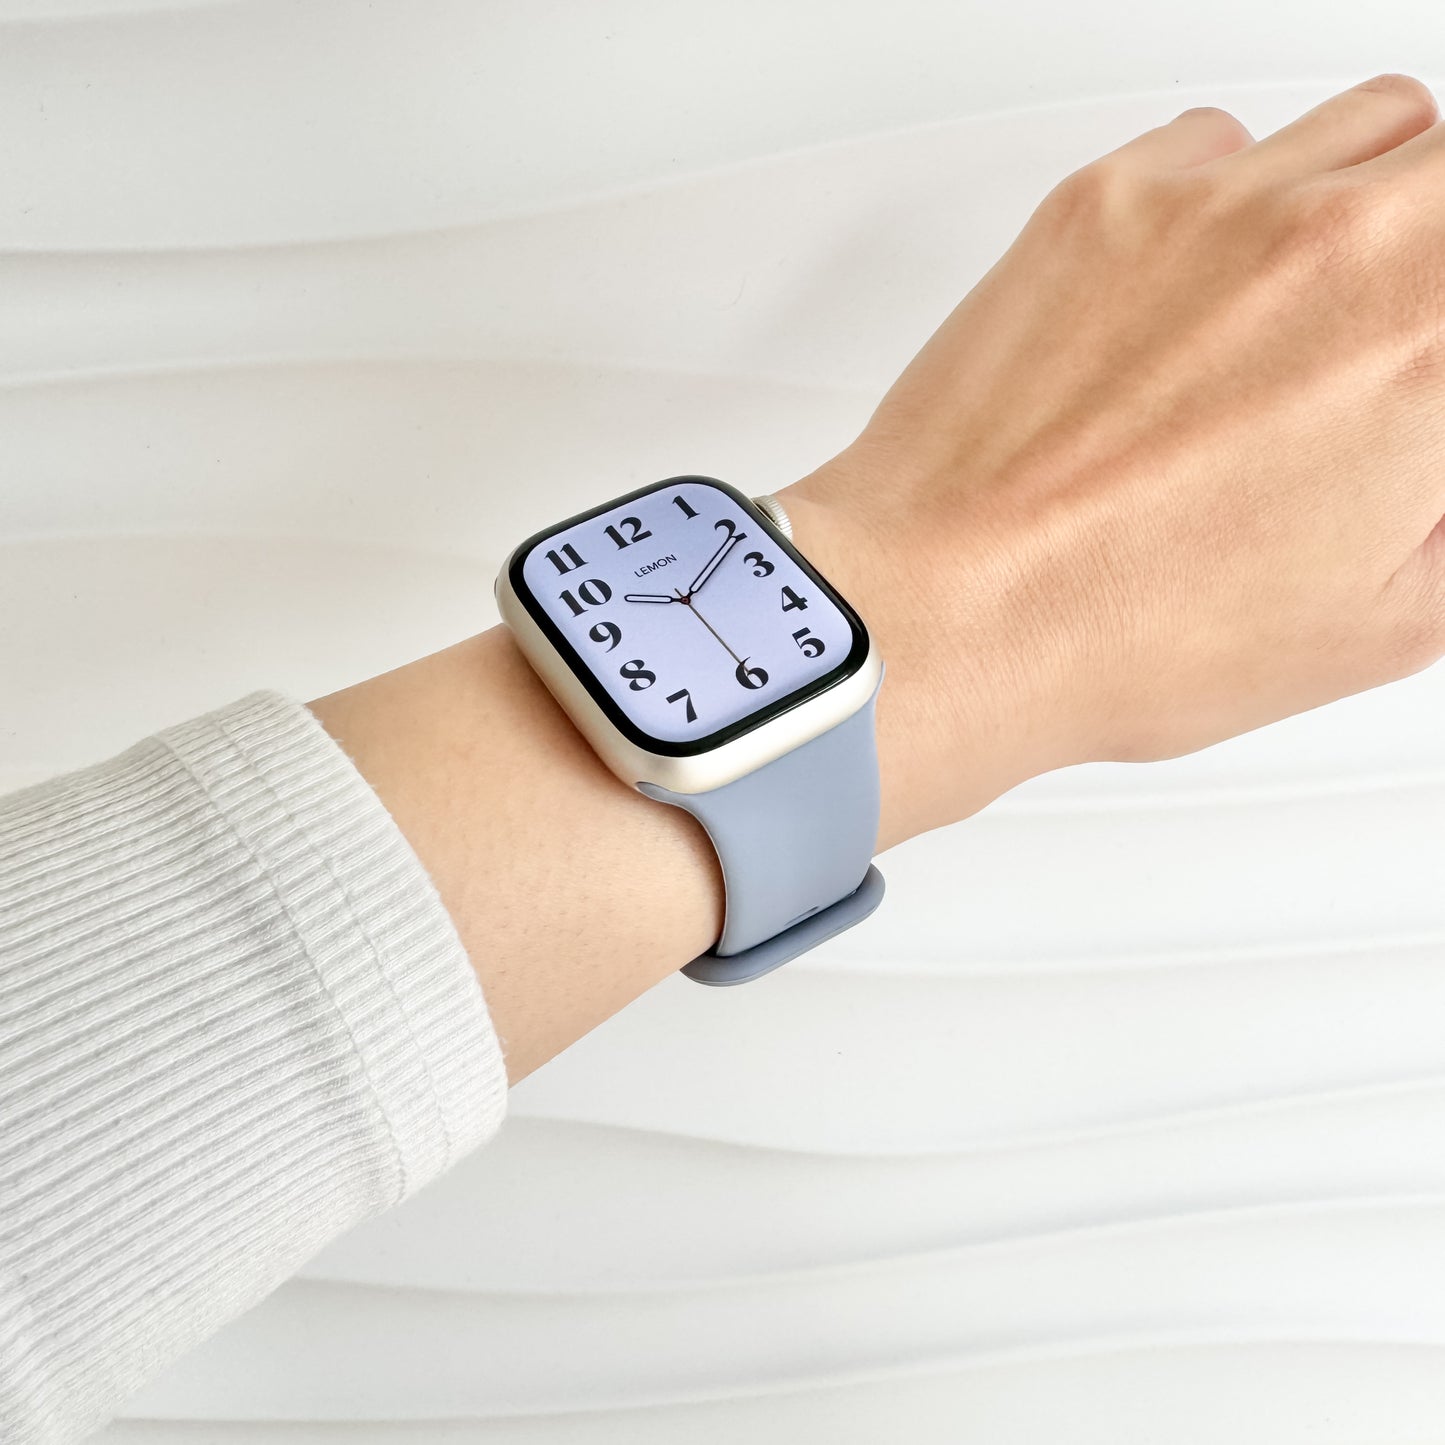 Classic Rubber Knob Apple Watch Band - Lavender Grey